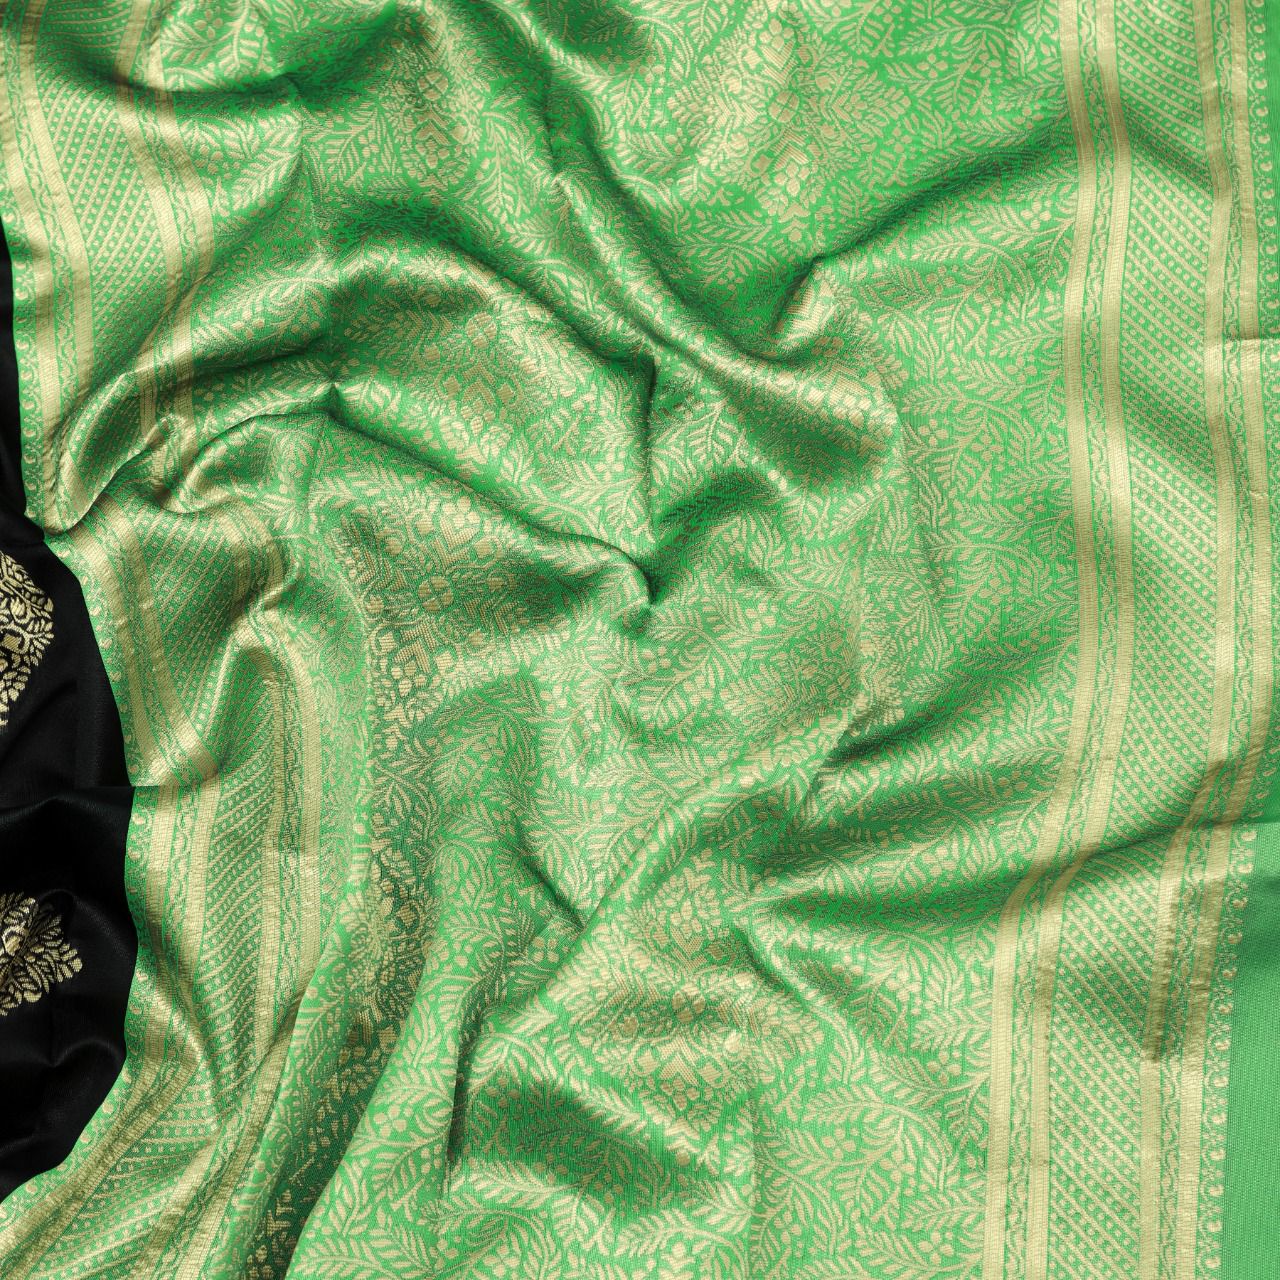 Quintessential Black Soft Silk Saree With Attractive Blouse Piece - Colorful Saree